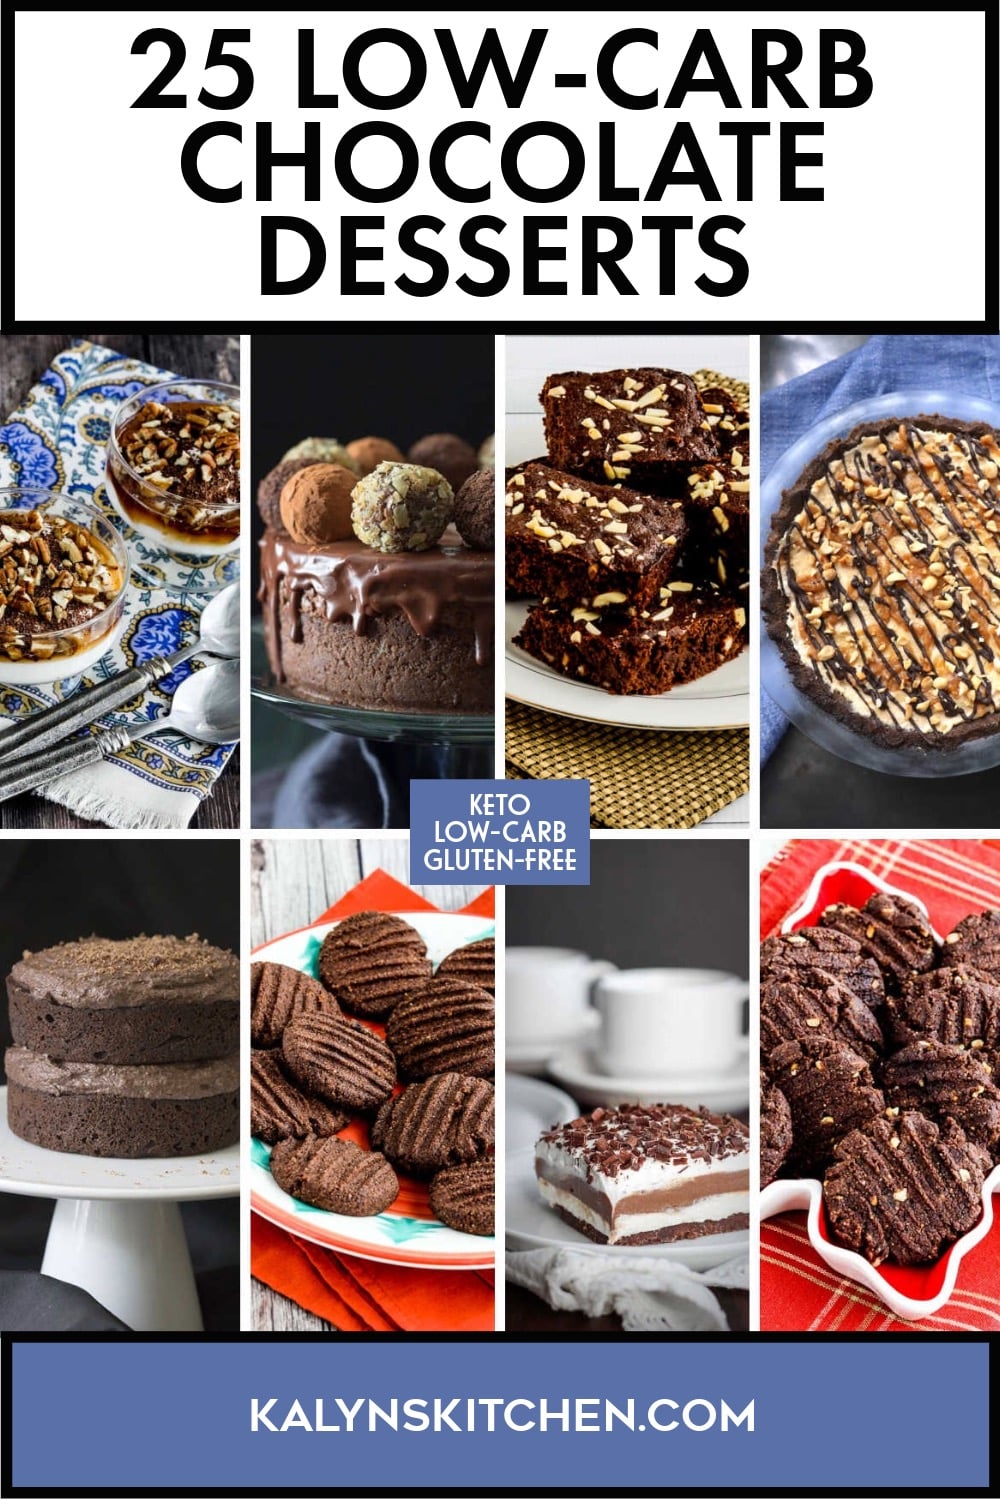 Pinterest image of 25 Low-Carb Chocolate Desserts